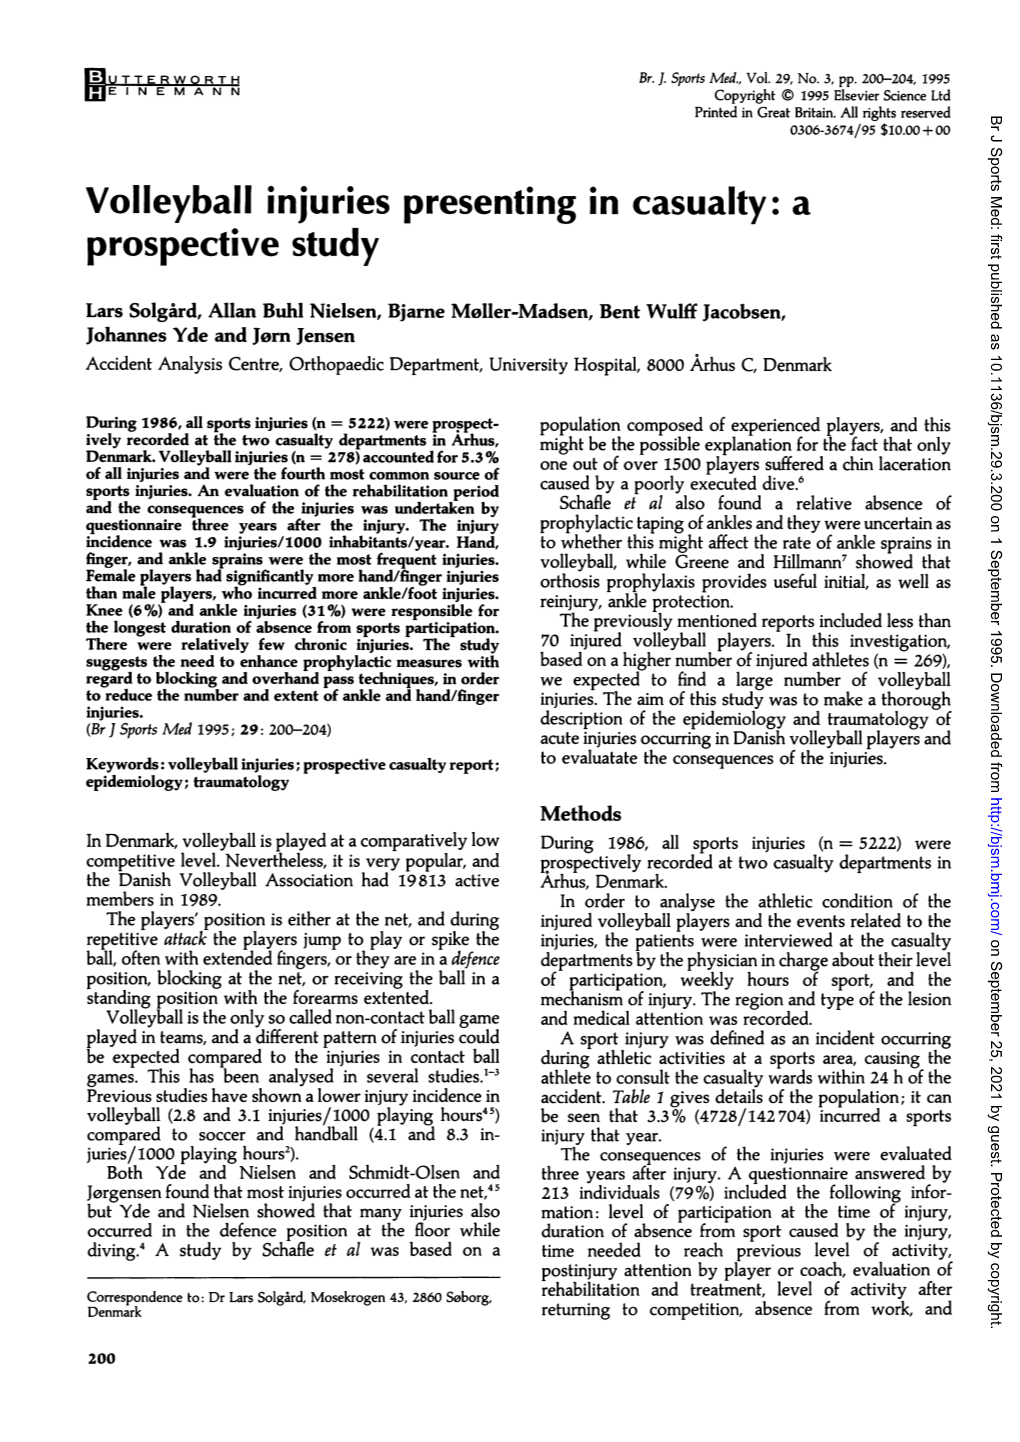 Volleyball Injuries Presenting in Casualty: a Prospective Study